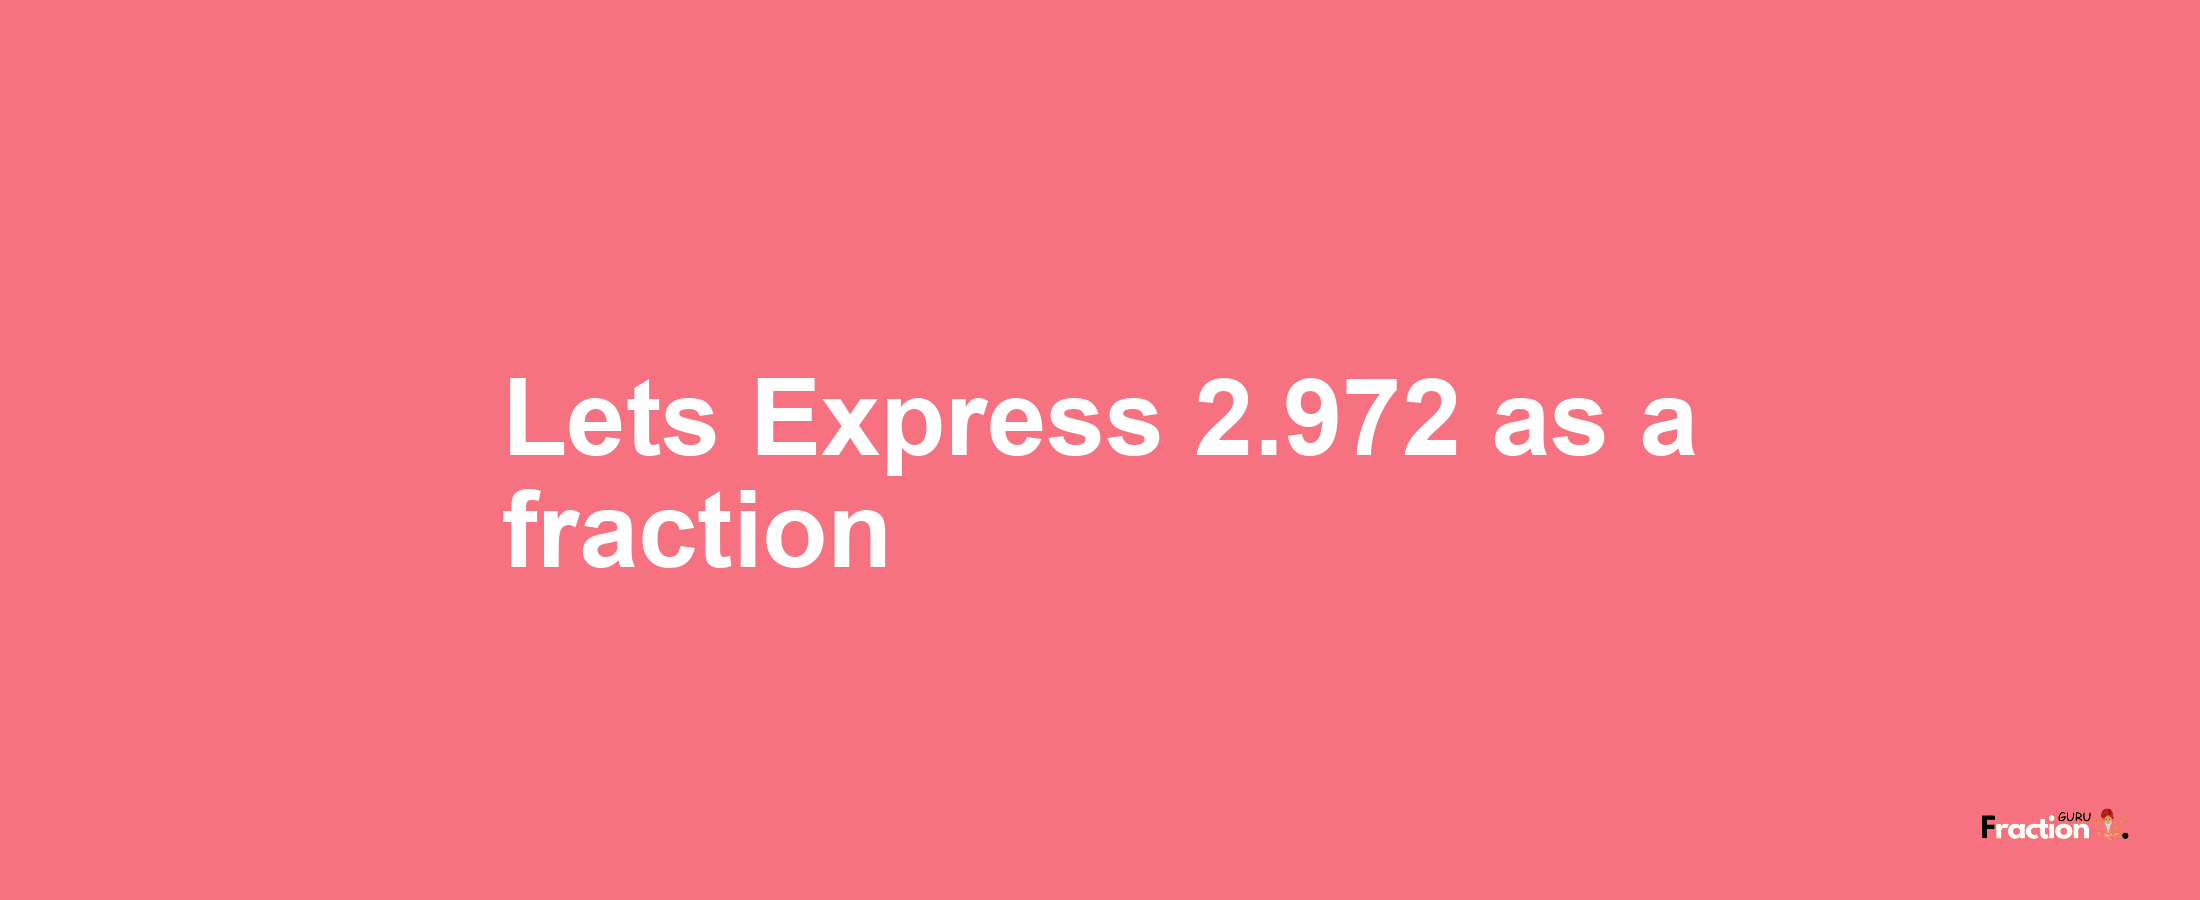 Lets Express 2.972 as afraction